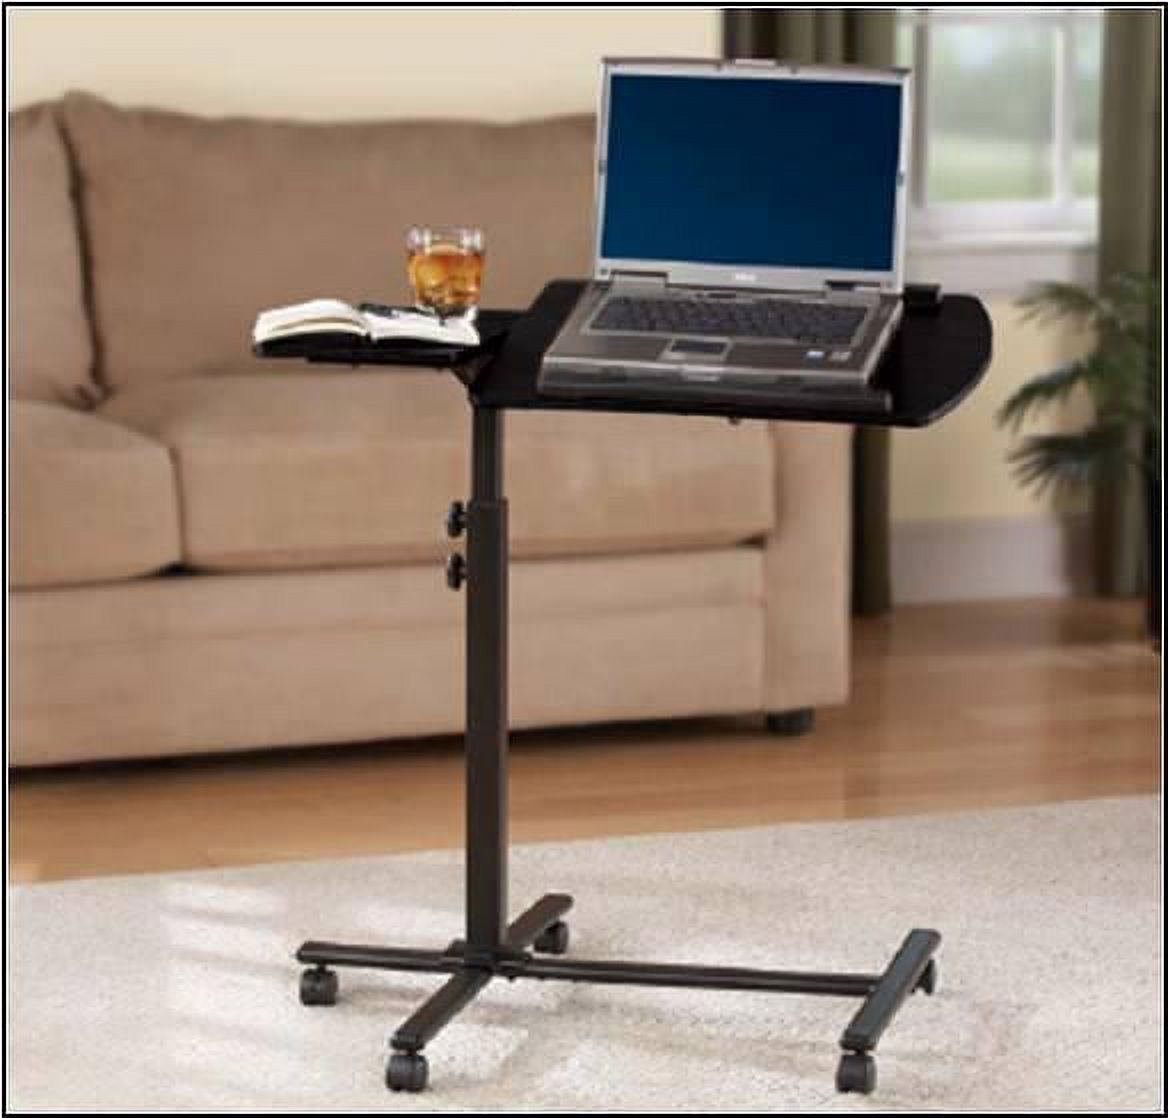 Mainstays Deluxe Laptop Cart, Black - image 1 of 8